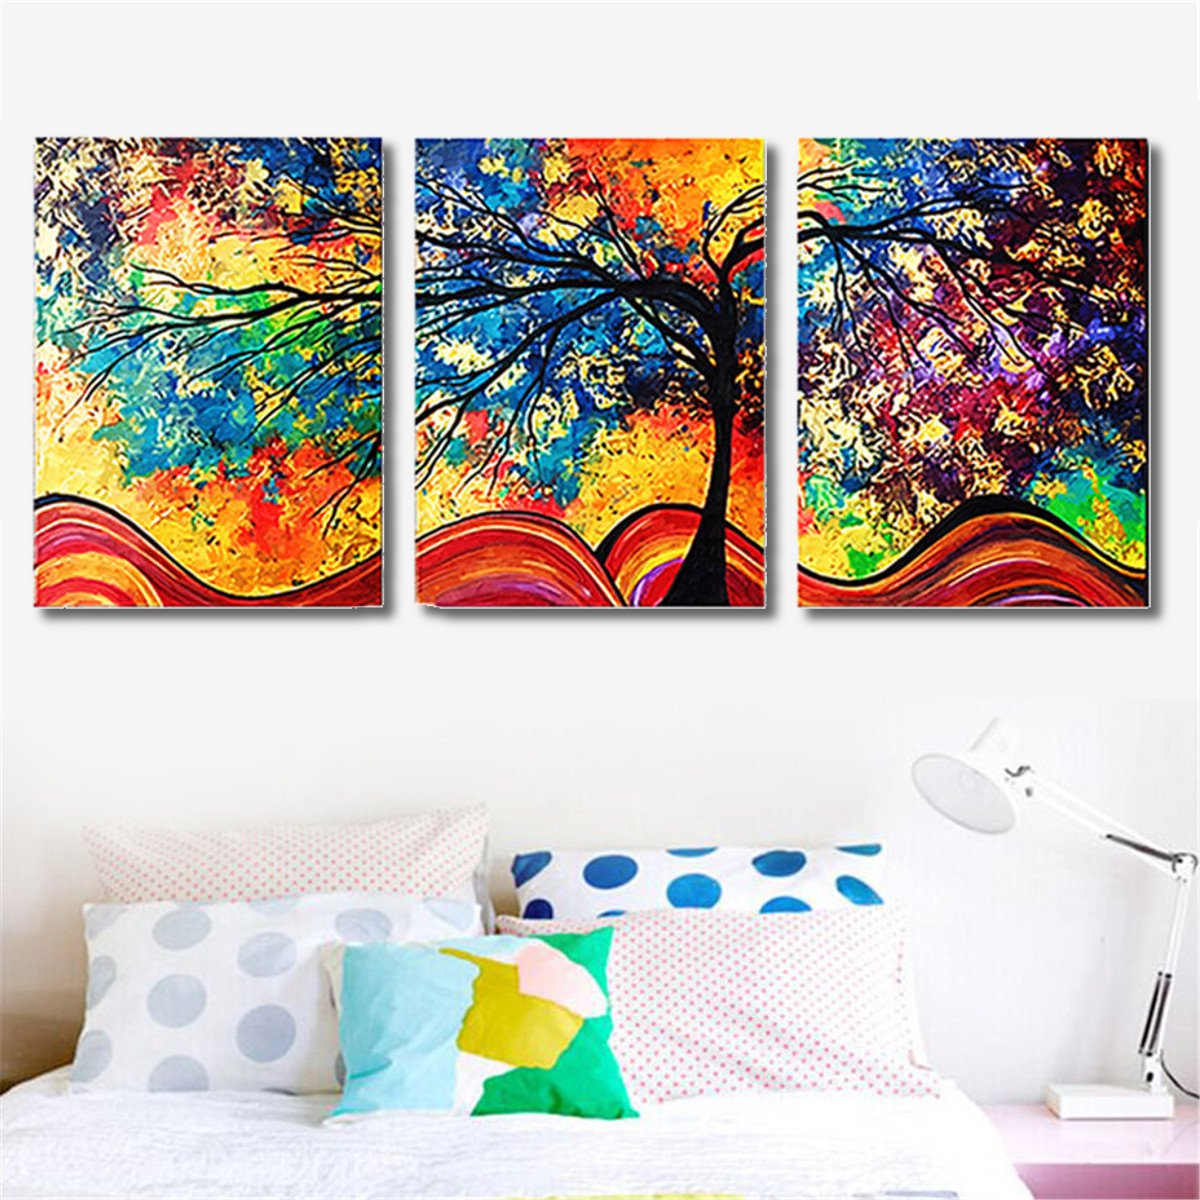 3Pcs-Colorful-Tree-HD-Canvas-Print-Paintings-Wall-Decorative-Print-Art-Pictures-FramedFrameless-Wall-1187263-6